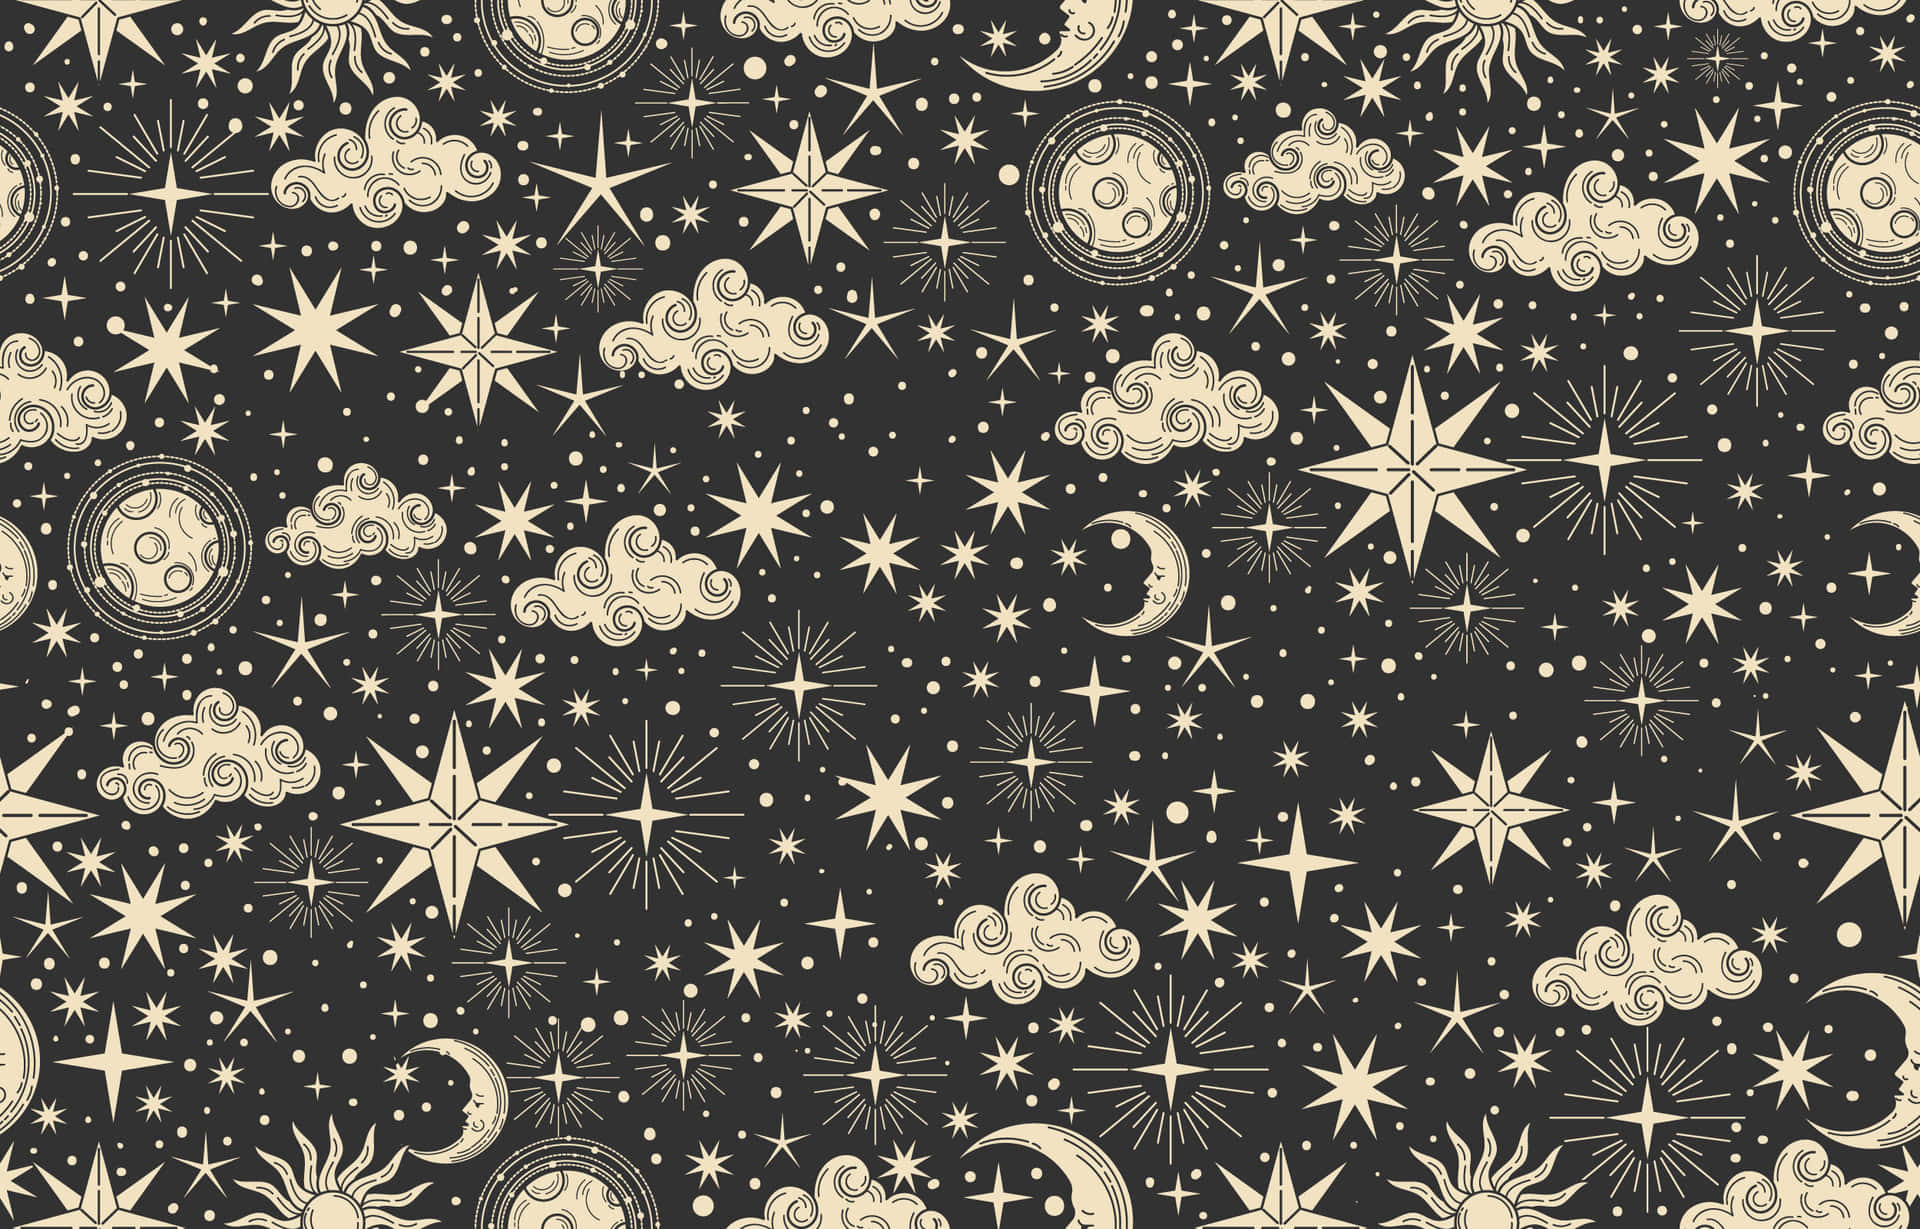 A Black And White Pattern With Stars And Clouds